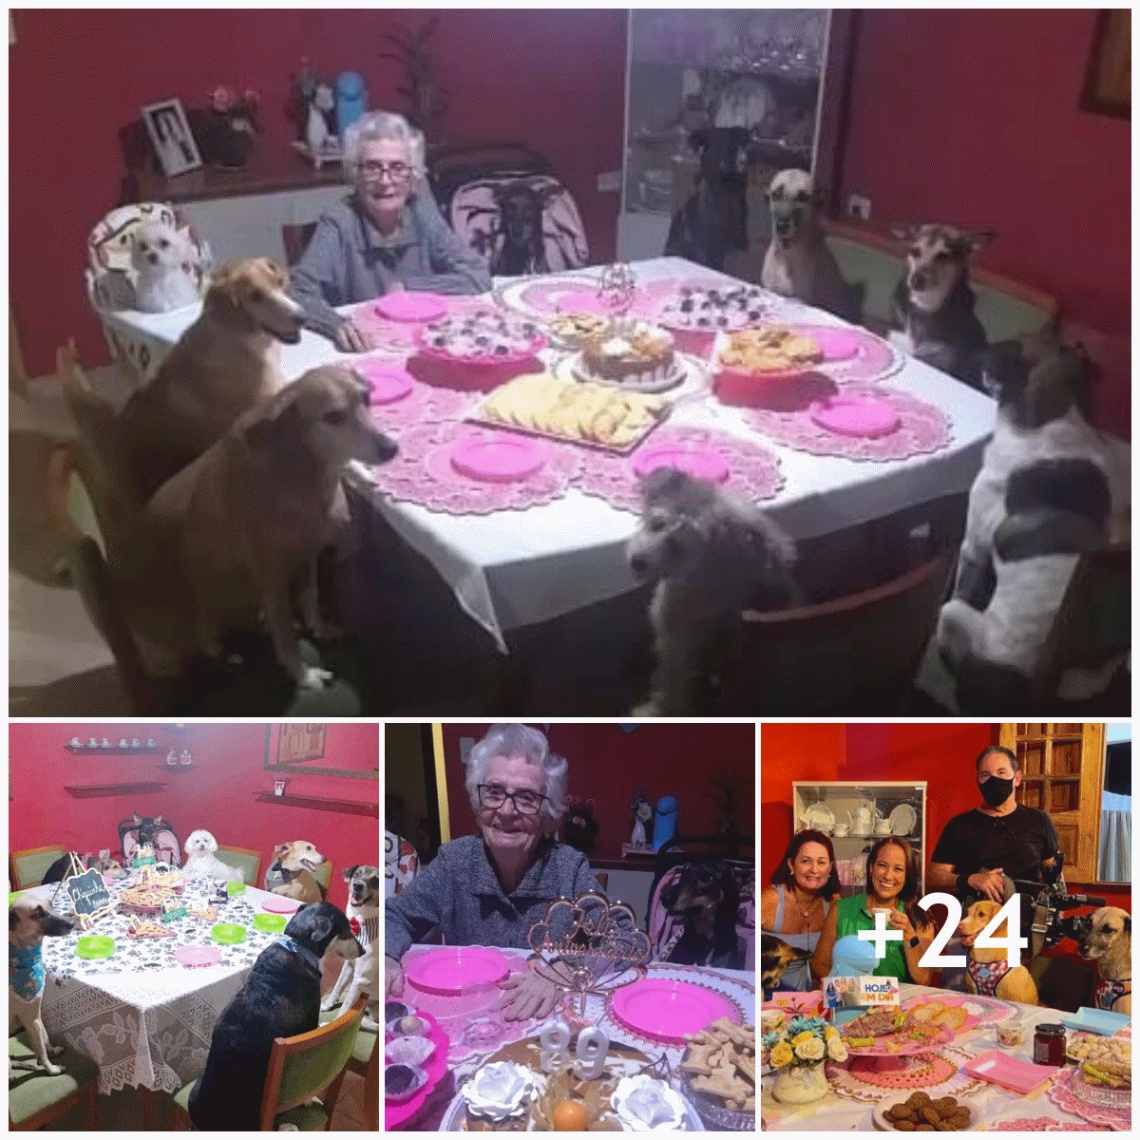 Special guests: The 89-year-old grandmother celebrated her most memorable birthday with her furry friends.